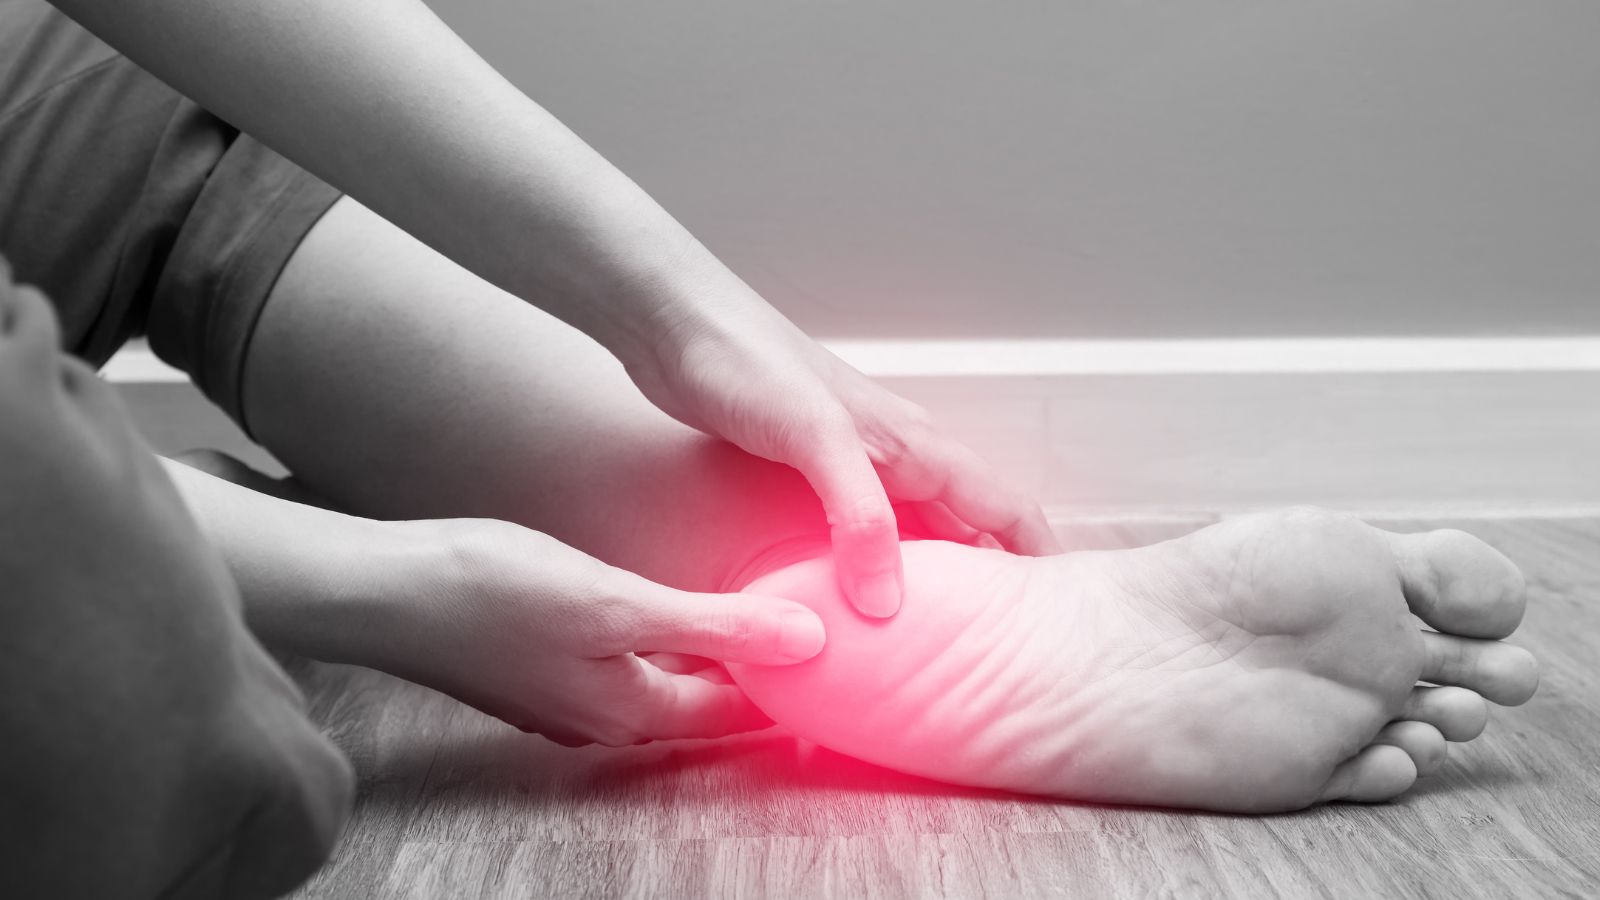 A woman sits on the ground with her hand pressing down on her heel, which is painful due to plantar fasciitis.